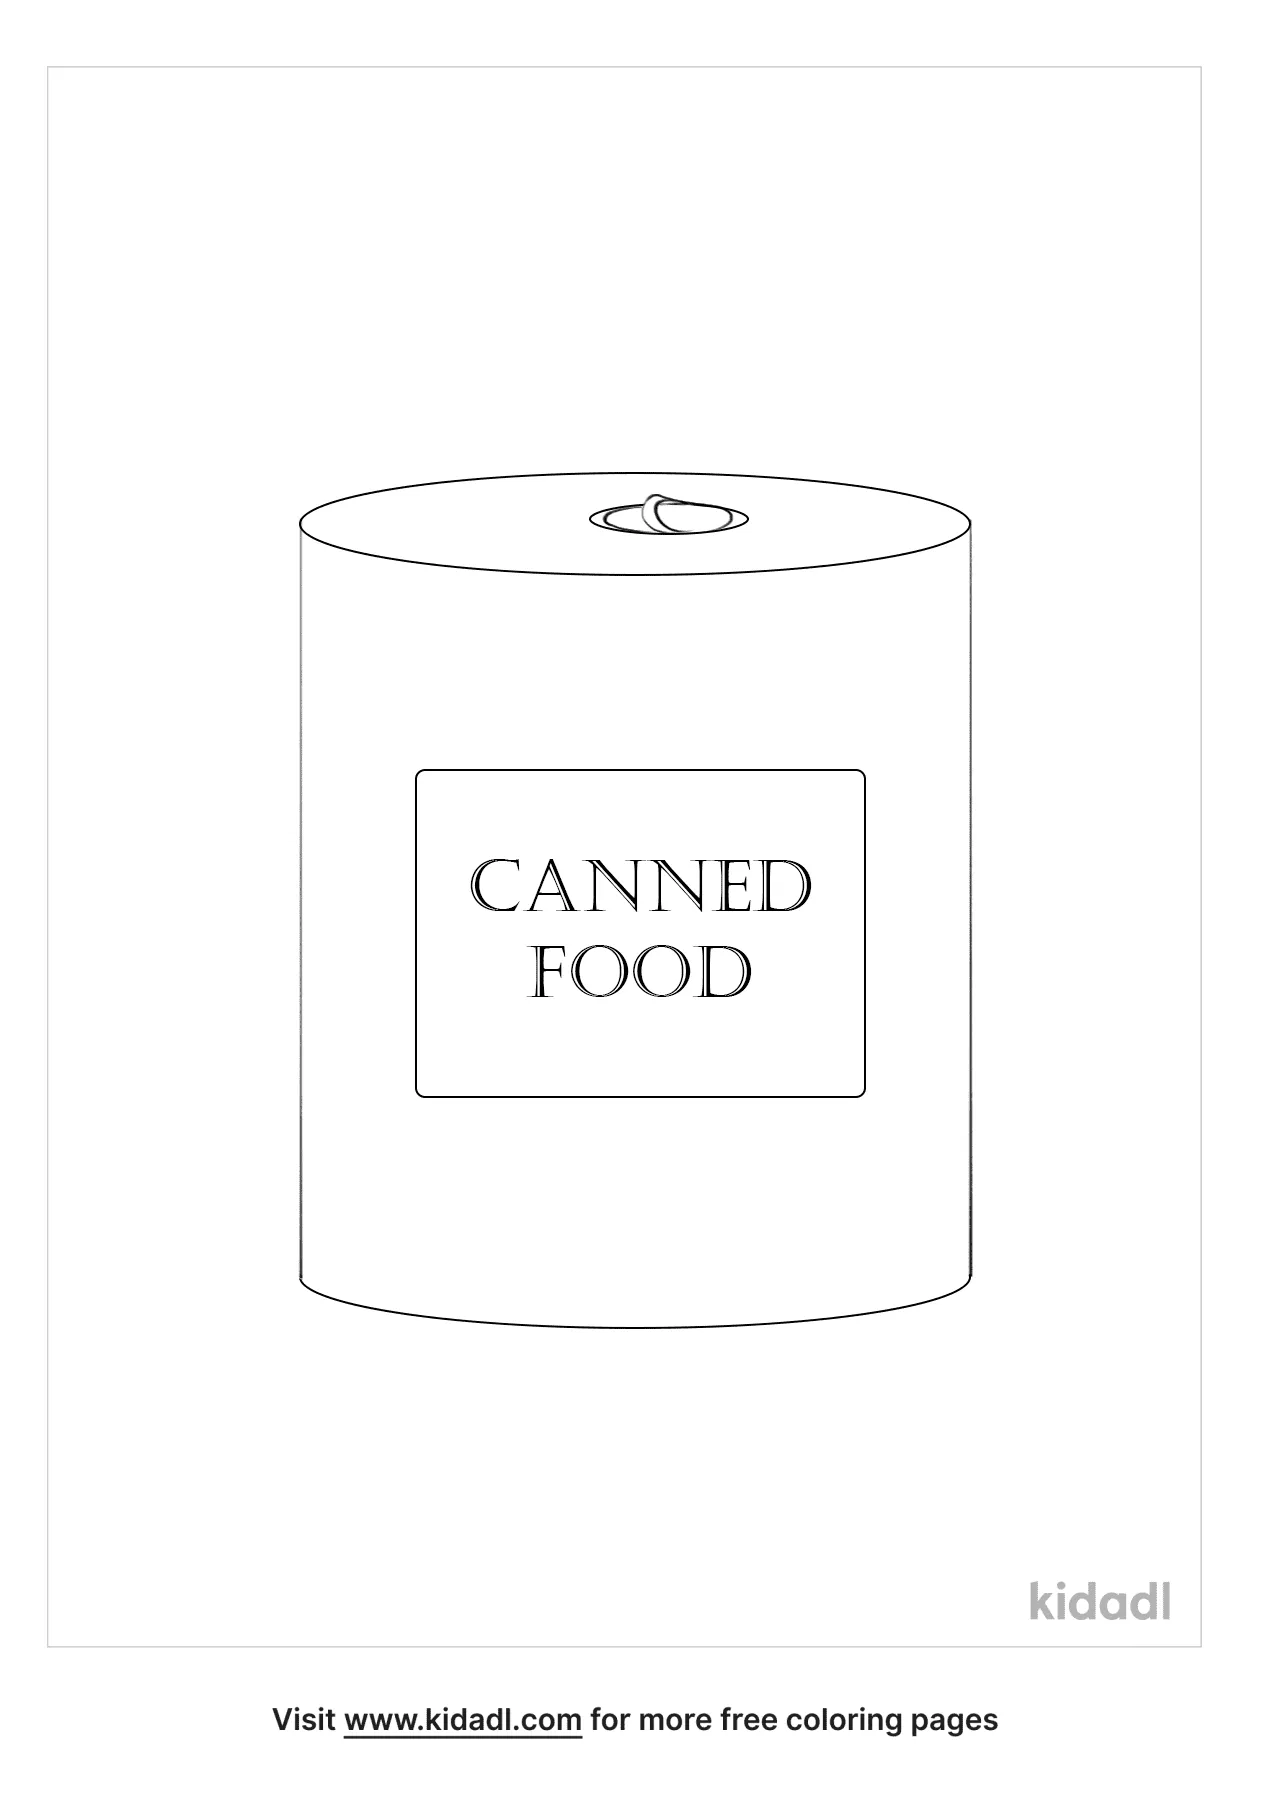 Canned Food Coloring Page